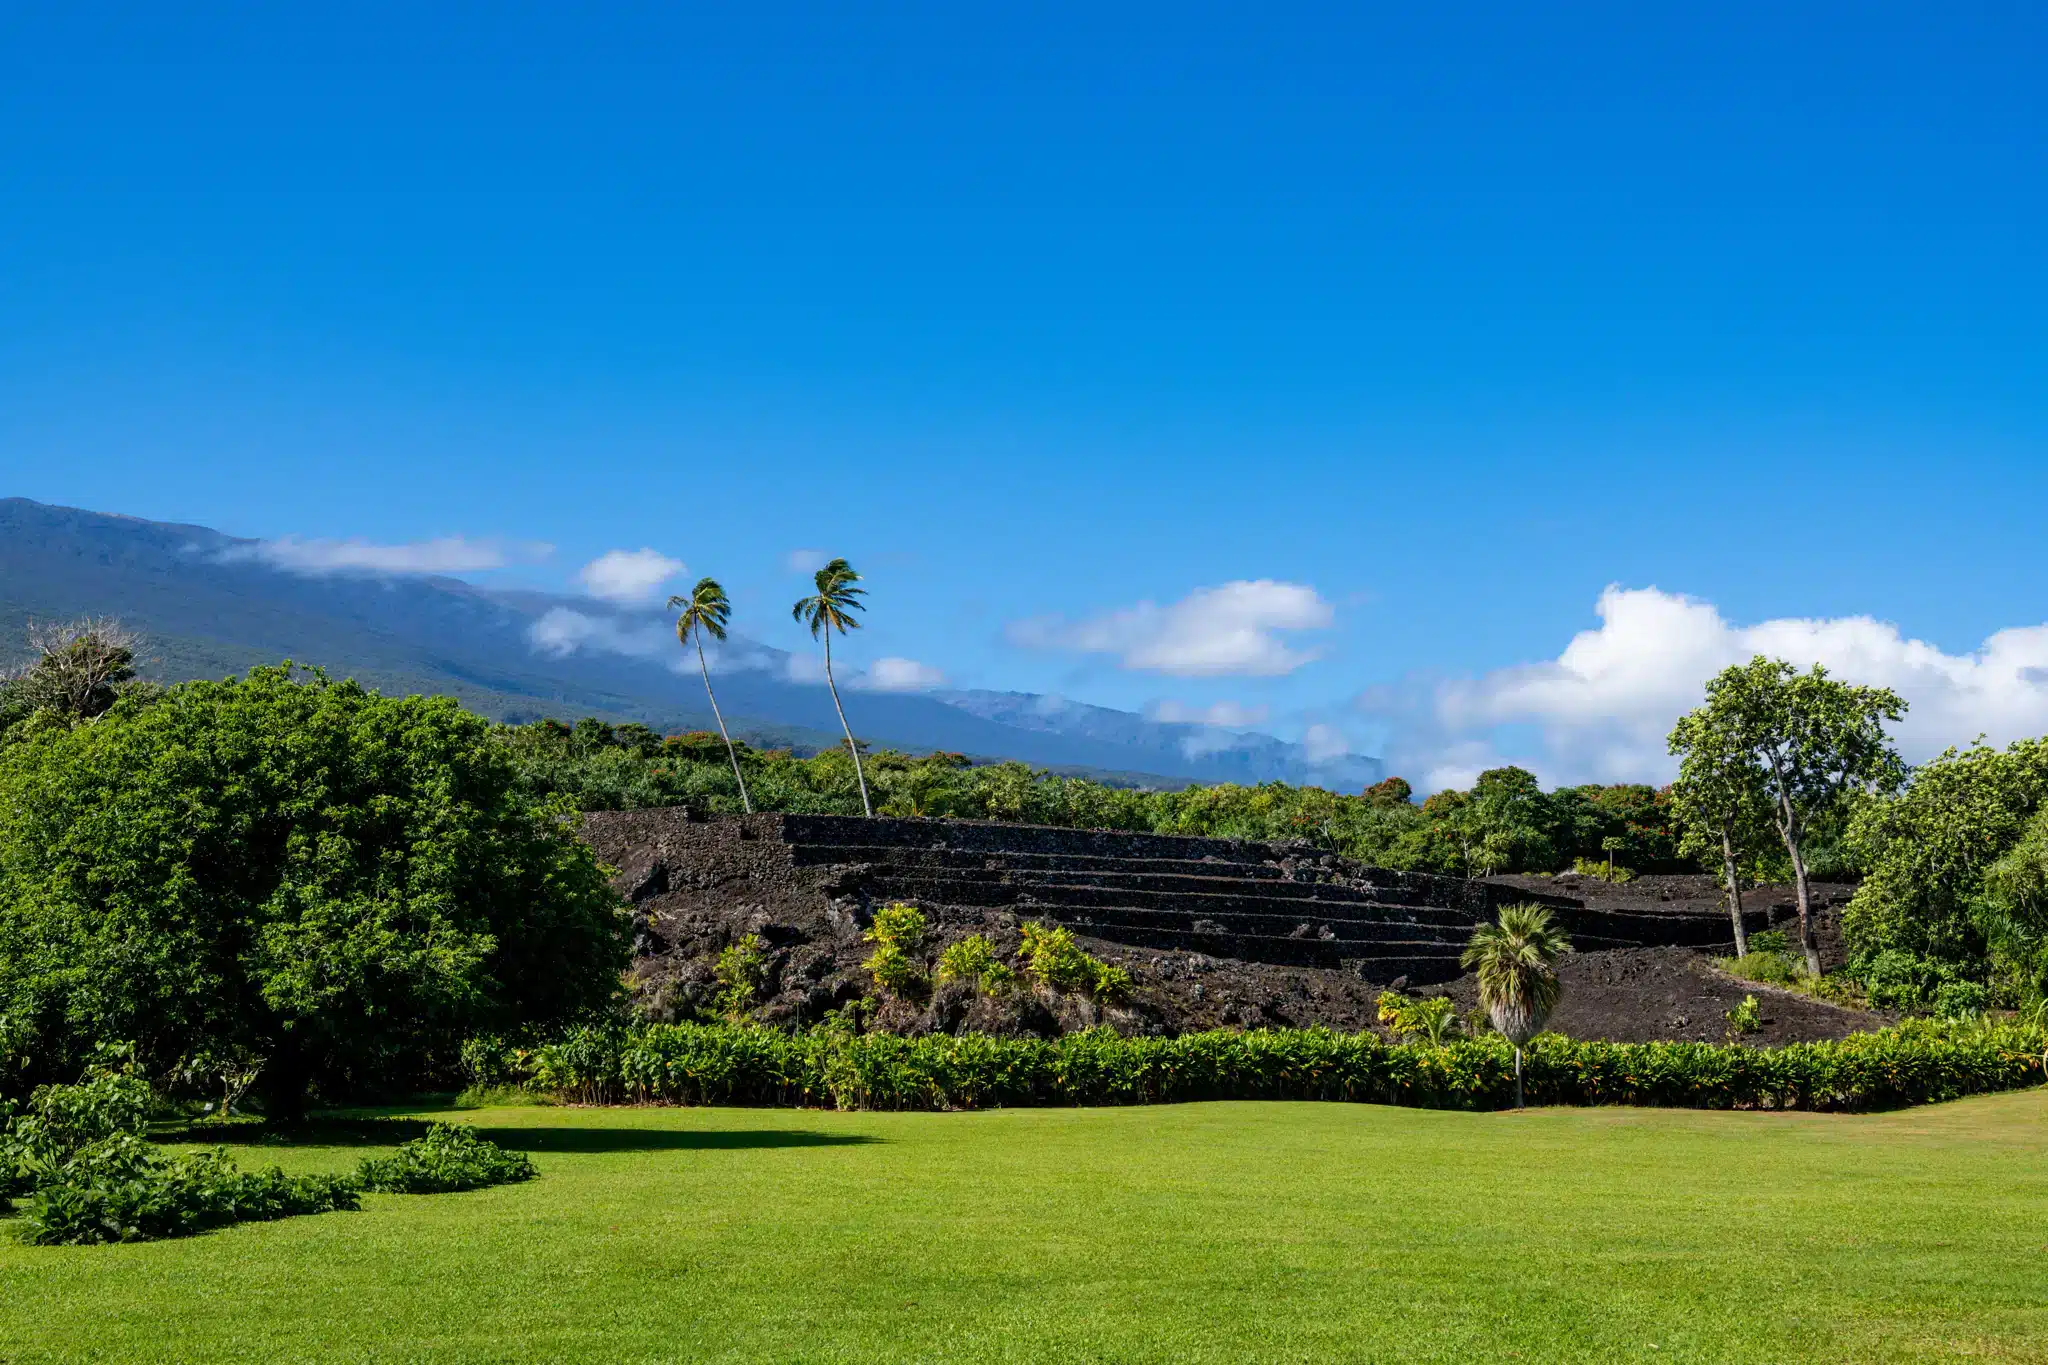 Kahanu Garden is a Heritage Site located in the city of Hana on Maui, Hawaii